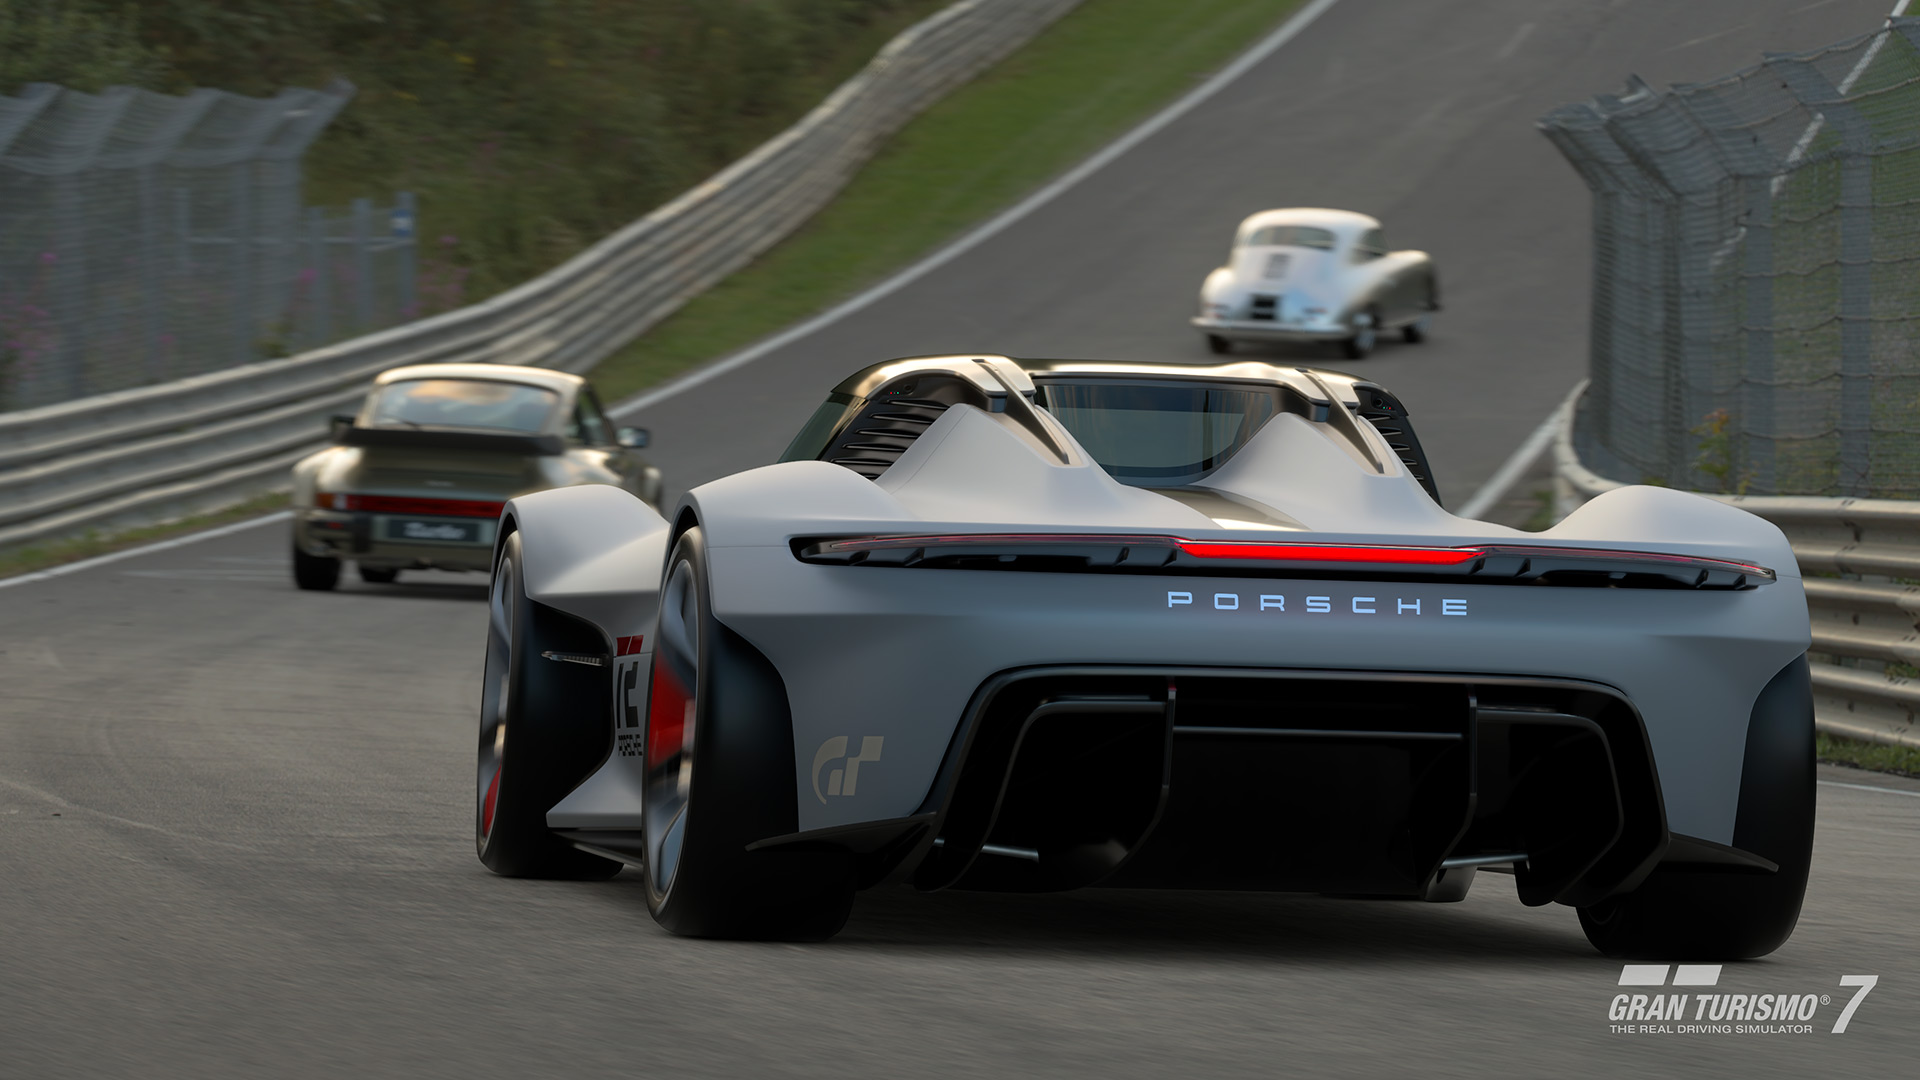 Gran Turismo 7 developers have released a monthly update for the game with new cars and modes